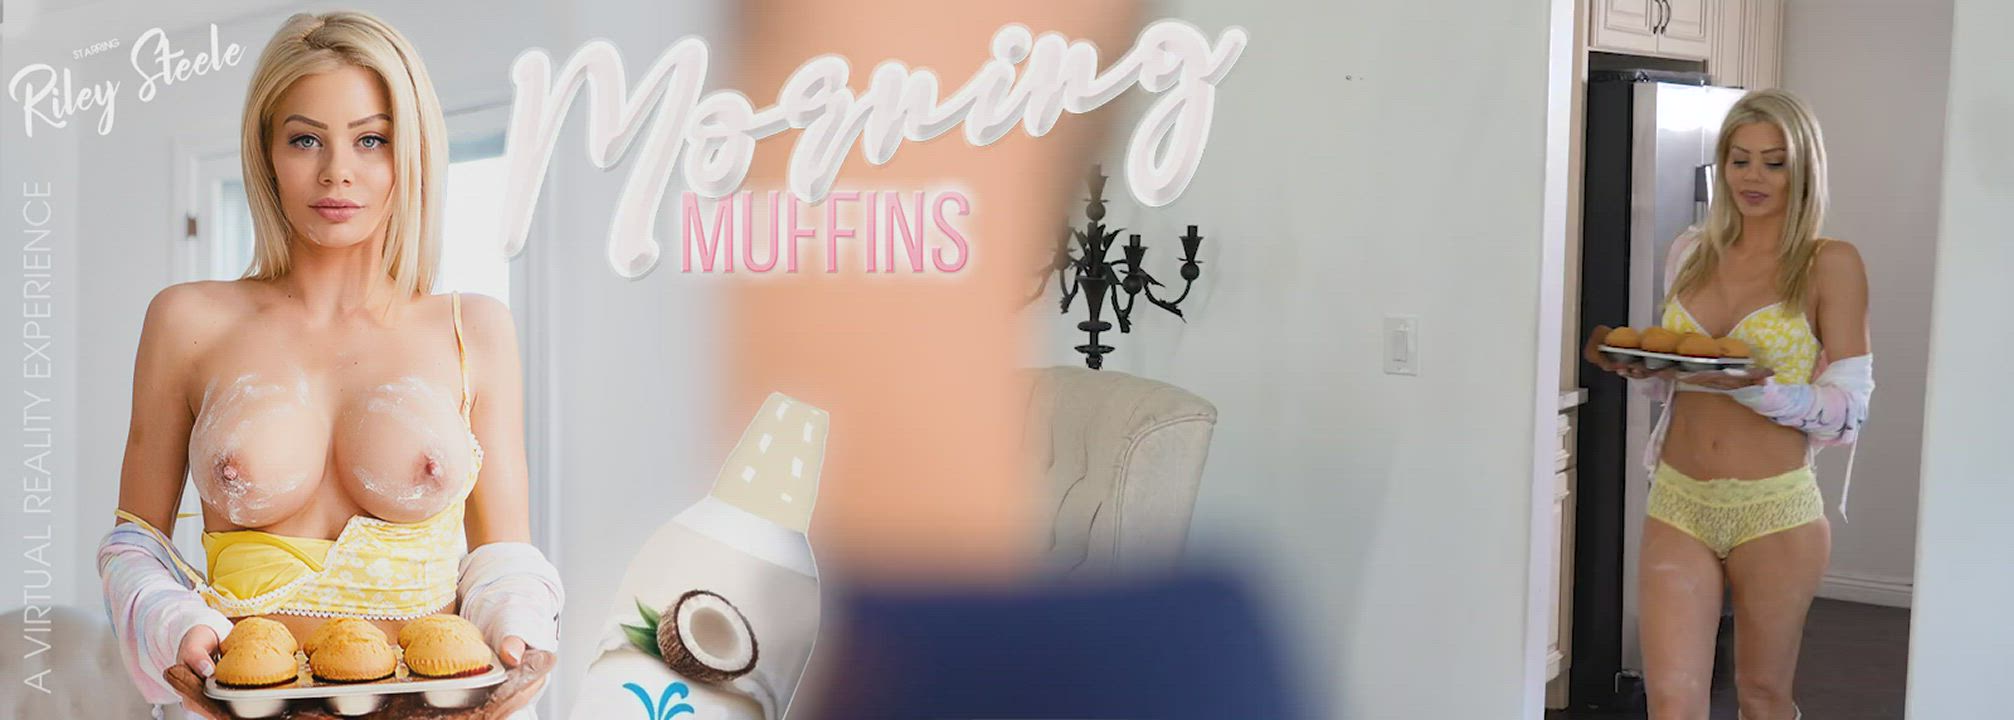 Morning Muffins : video clip